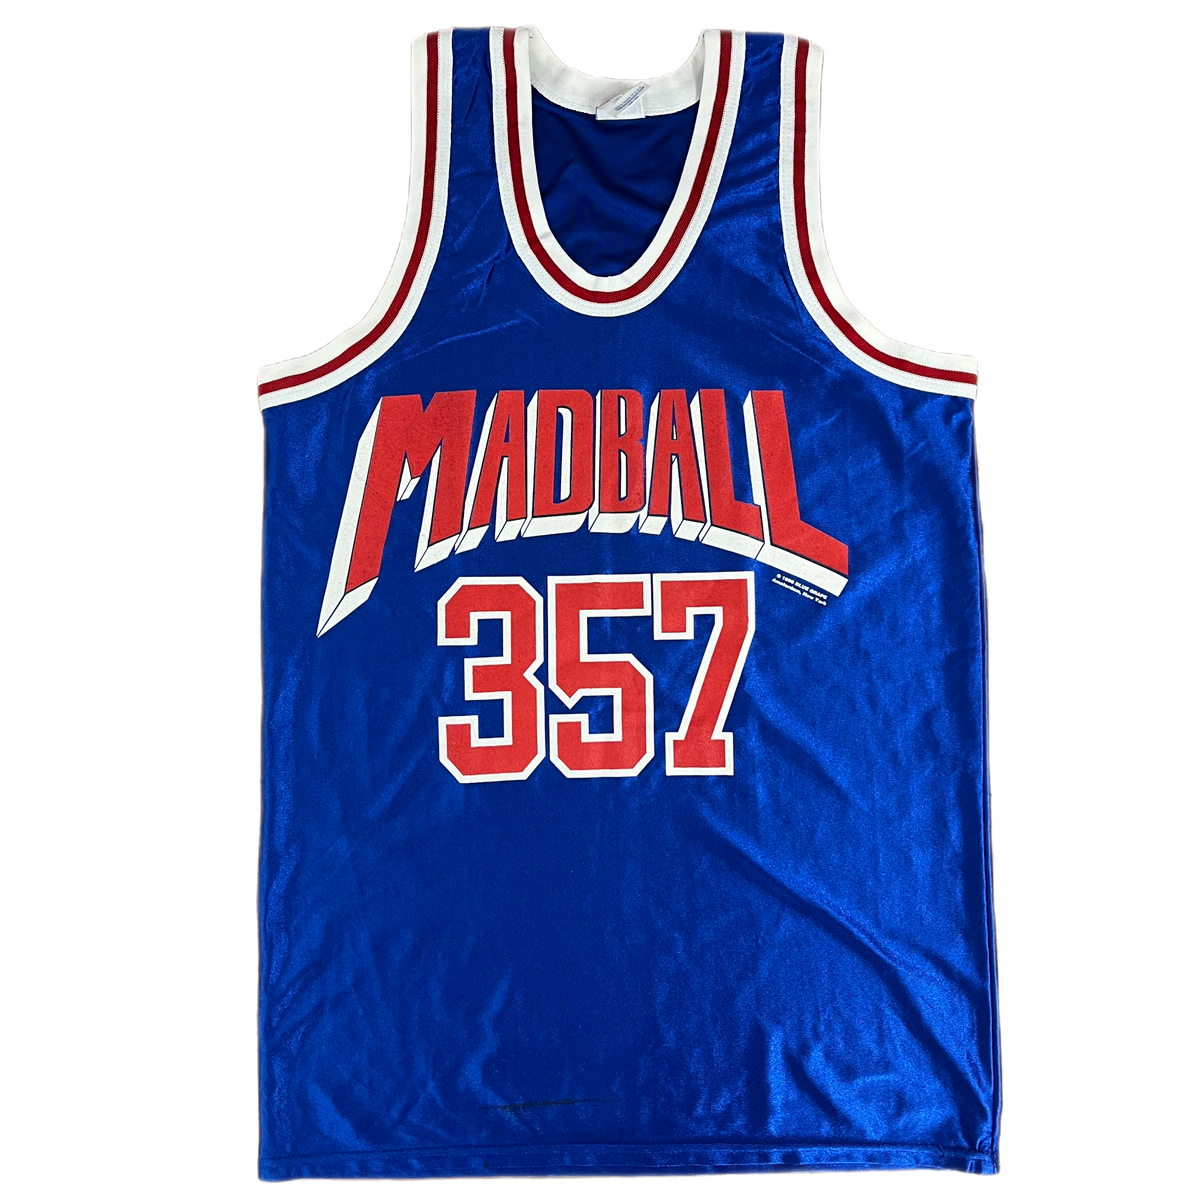 Vintage Madball &quot;Demonstrating My Style&quot; Basketball Jersey